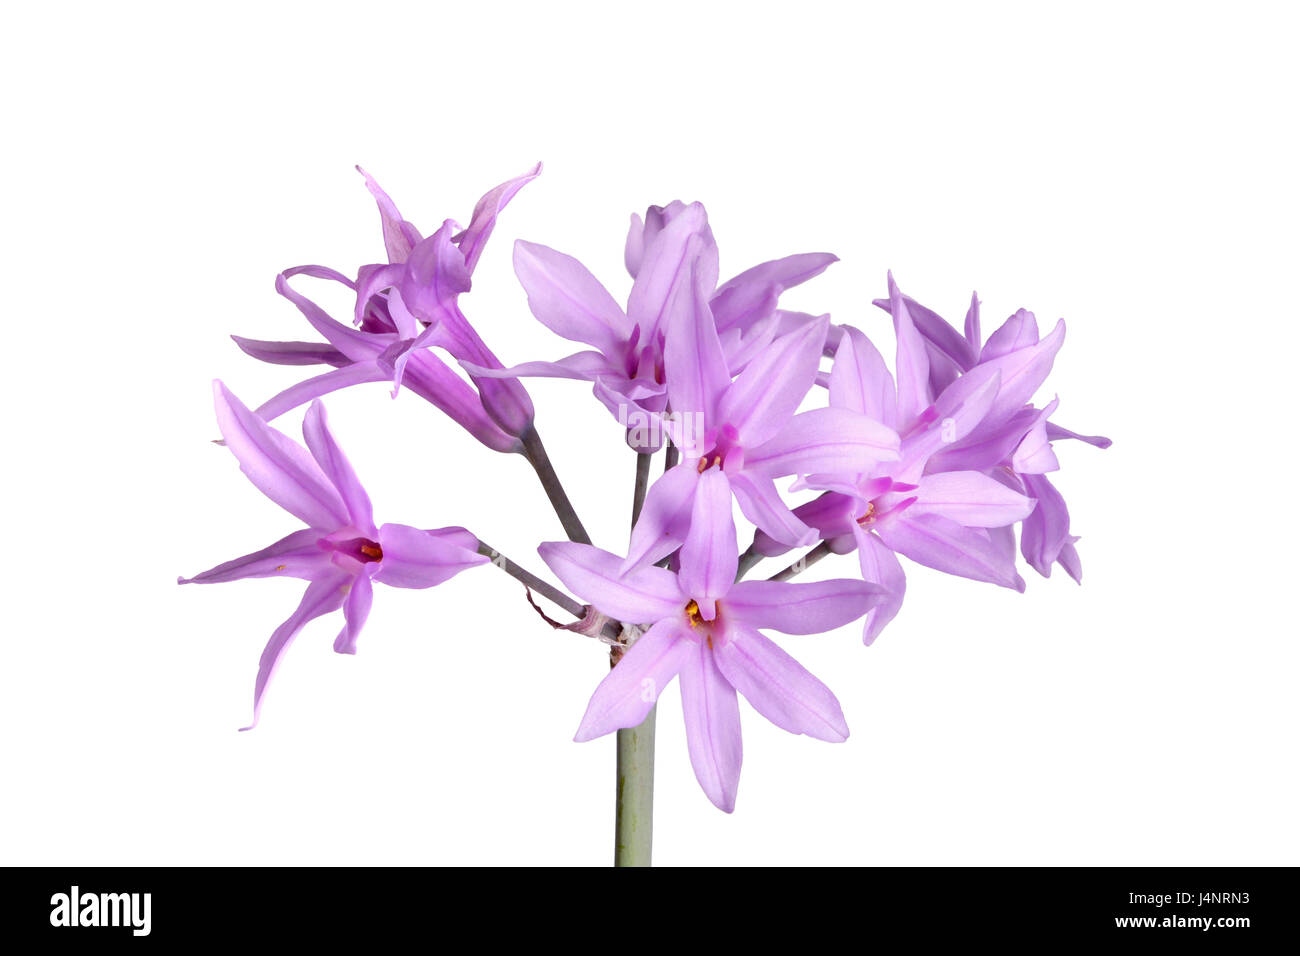 Closeup of a single stem with an umbel of purple flowers of society garlic or pink agapanthus (Tulbaghia violacea) isolated against a white background Stock Photo